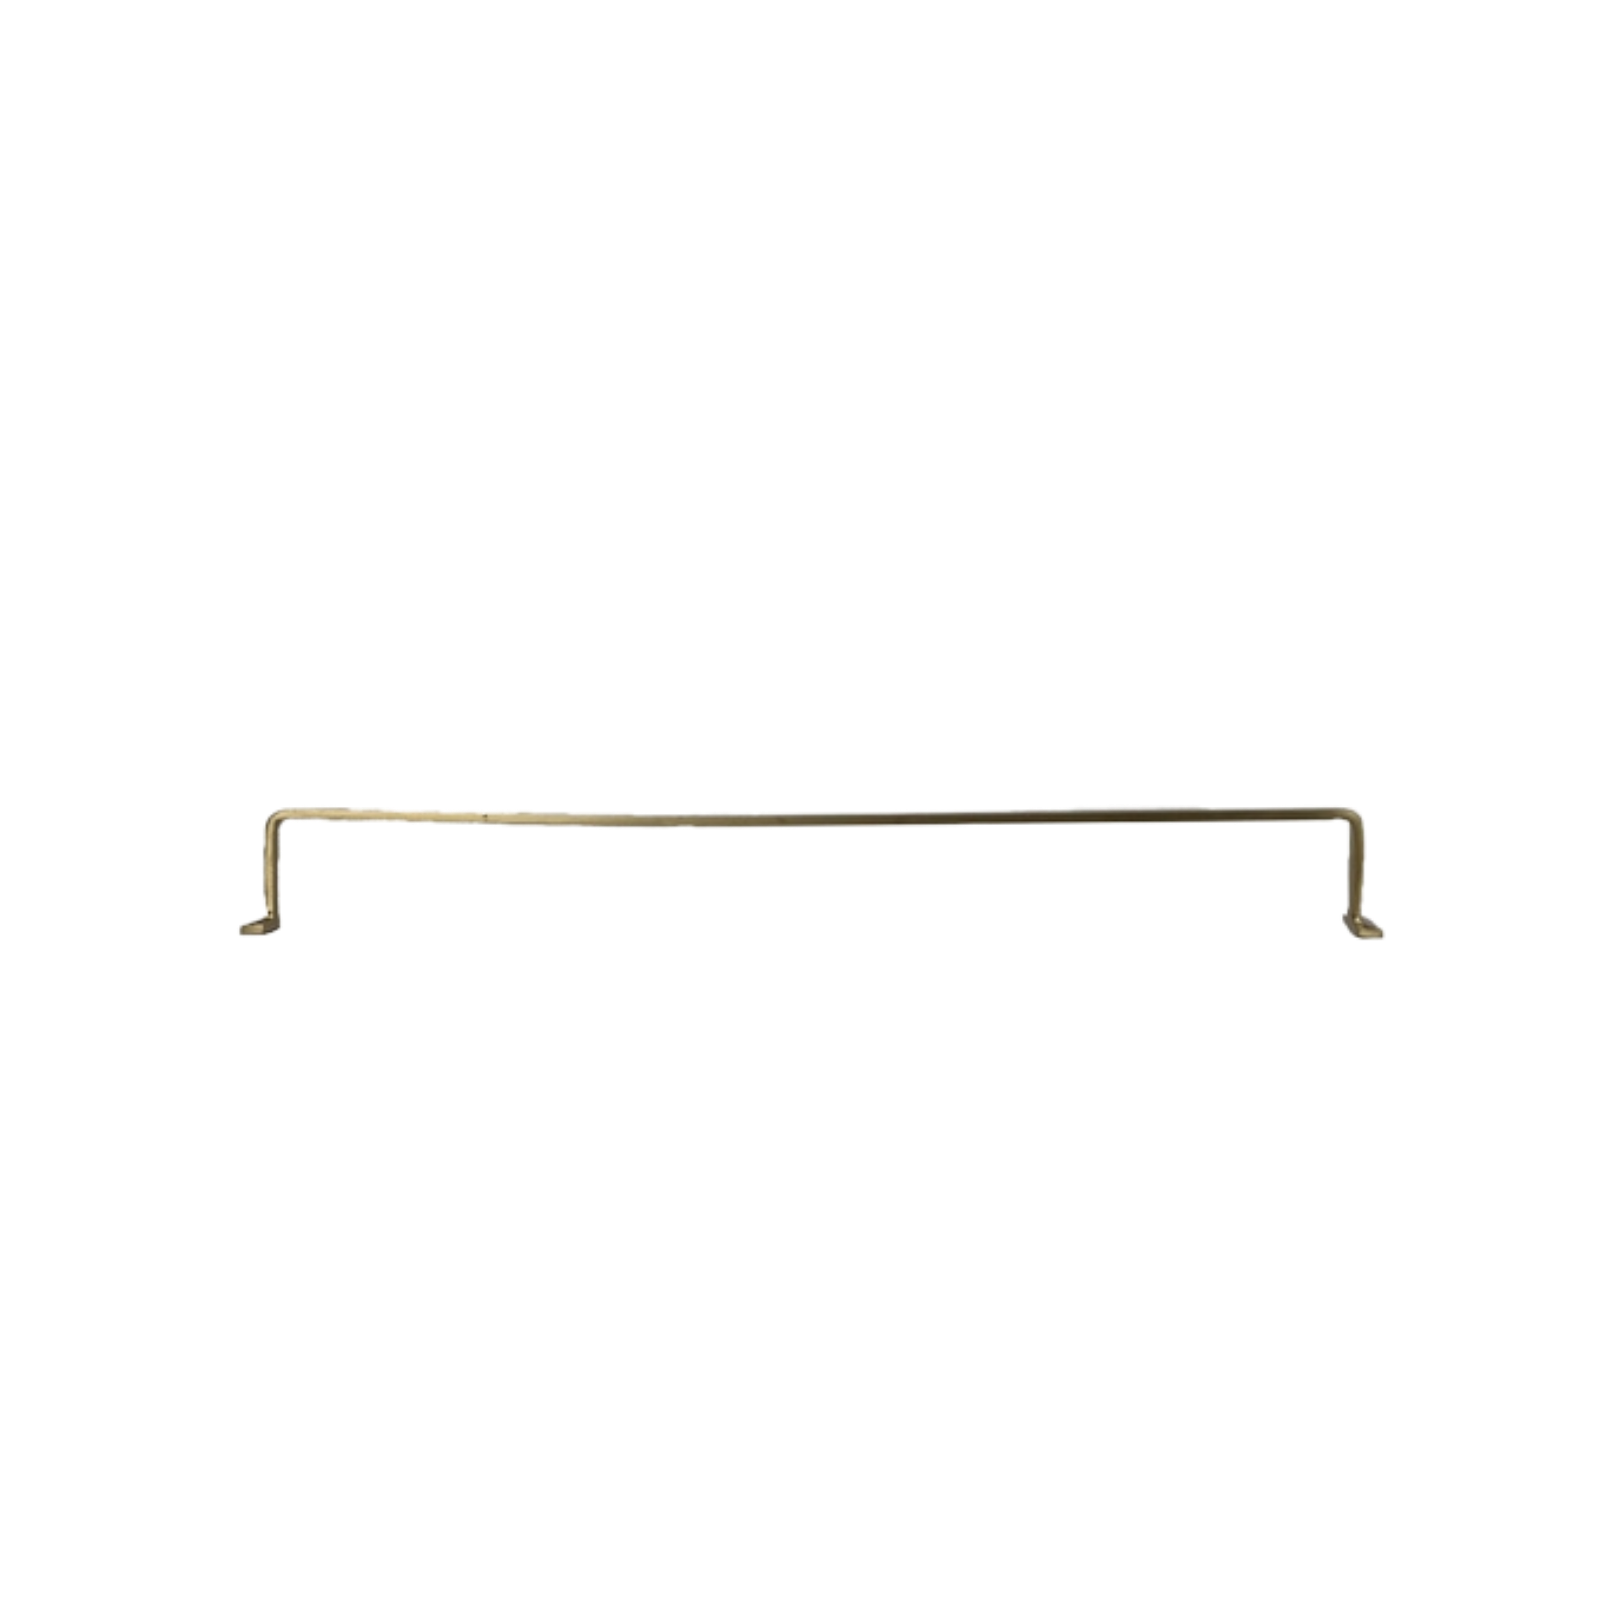 Brushed Brass Bathroom Accessories for Sale at the Best Prices Online